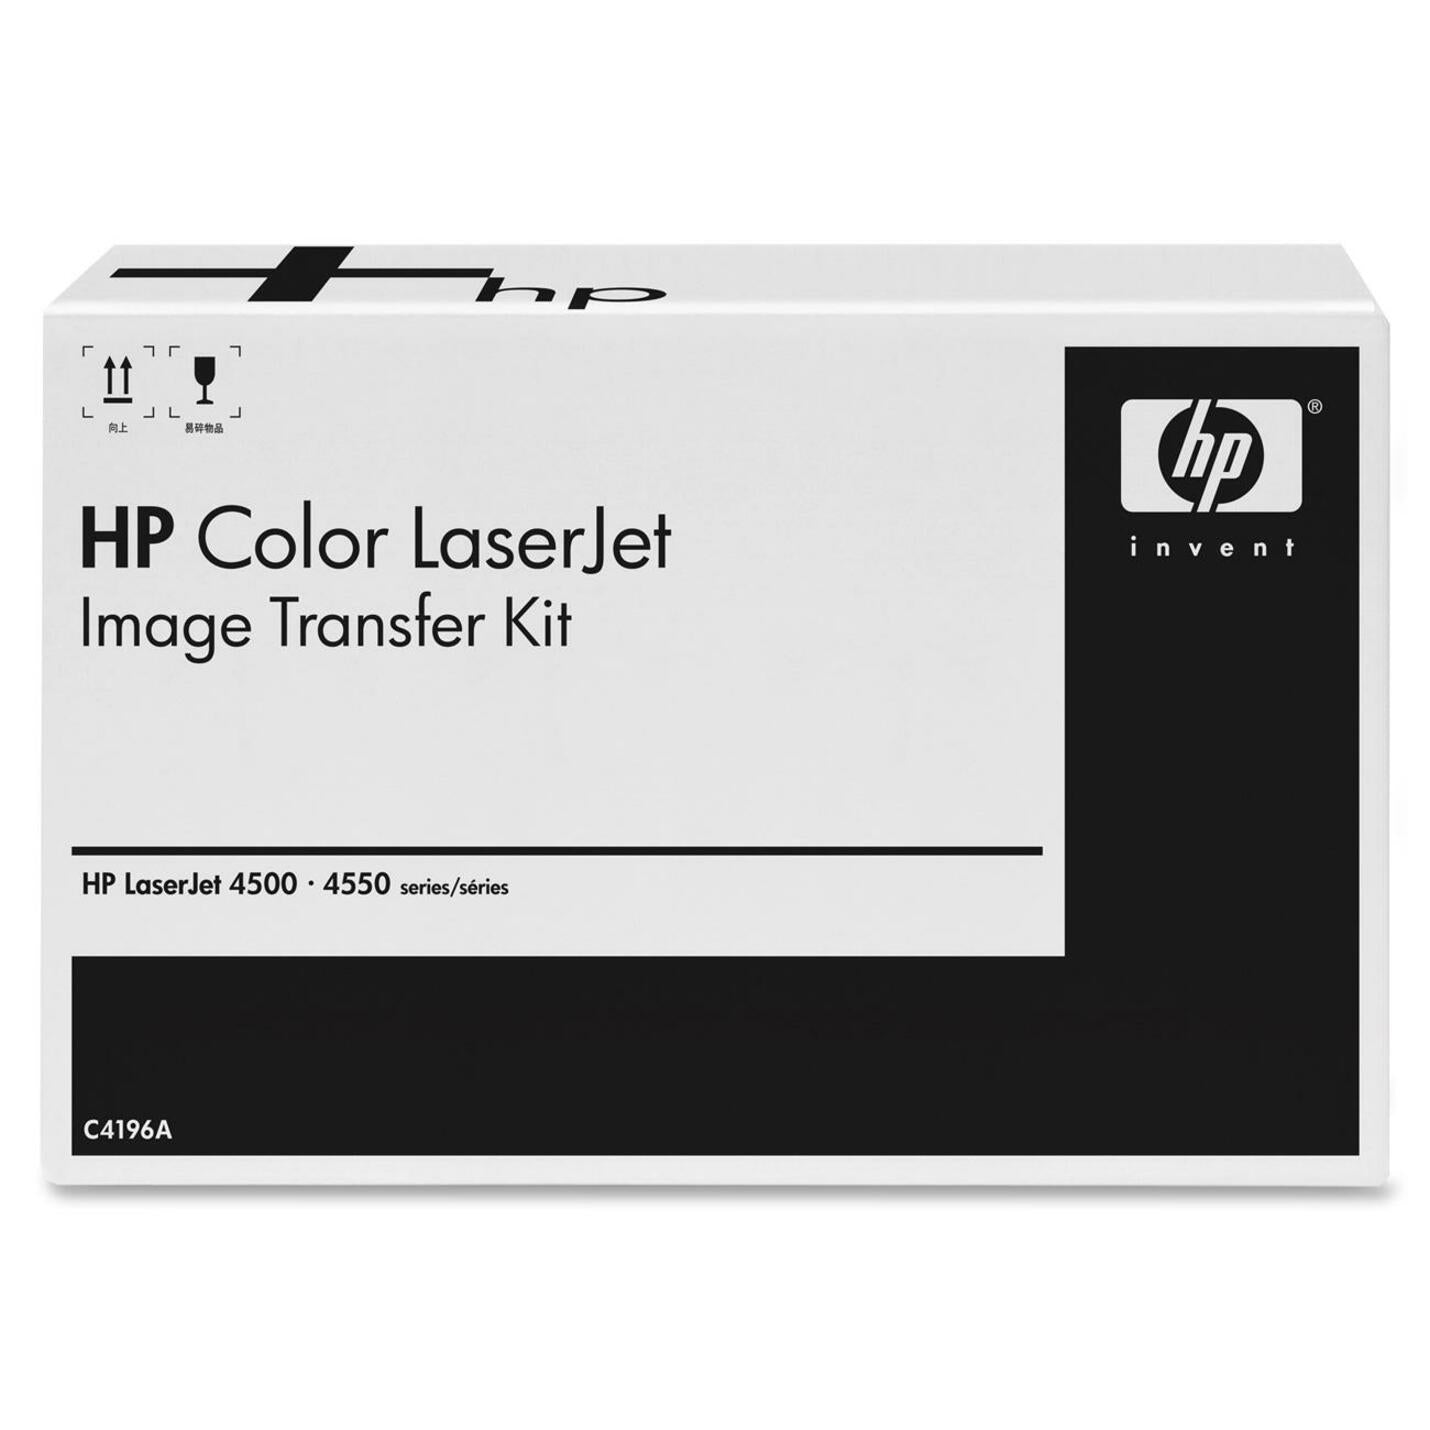 HP C4196A Transfer Kit For Color LaserJet 4500 Printers, Genuine OEM Part, Easy Replacement